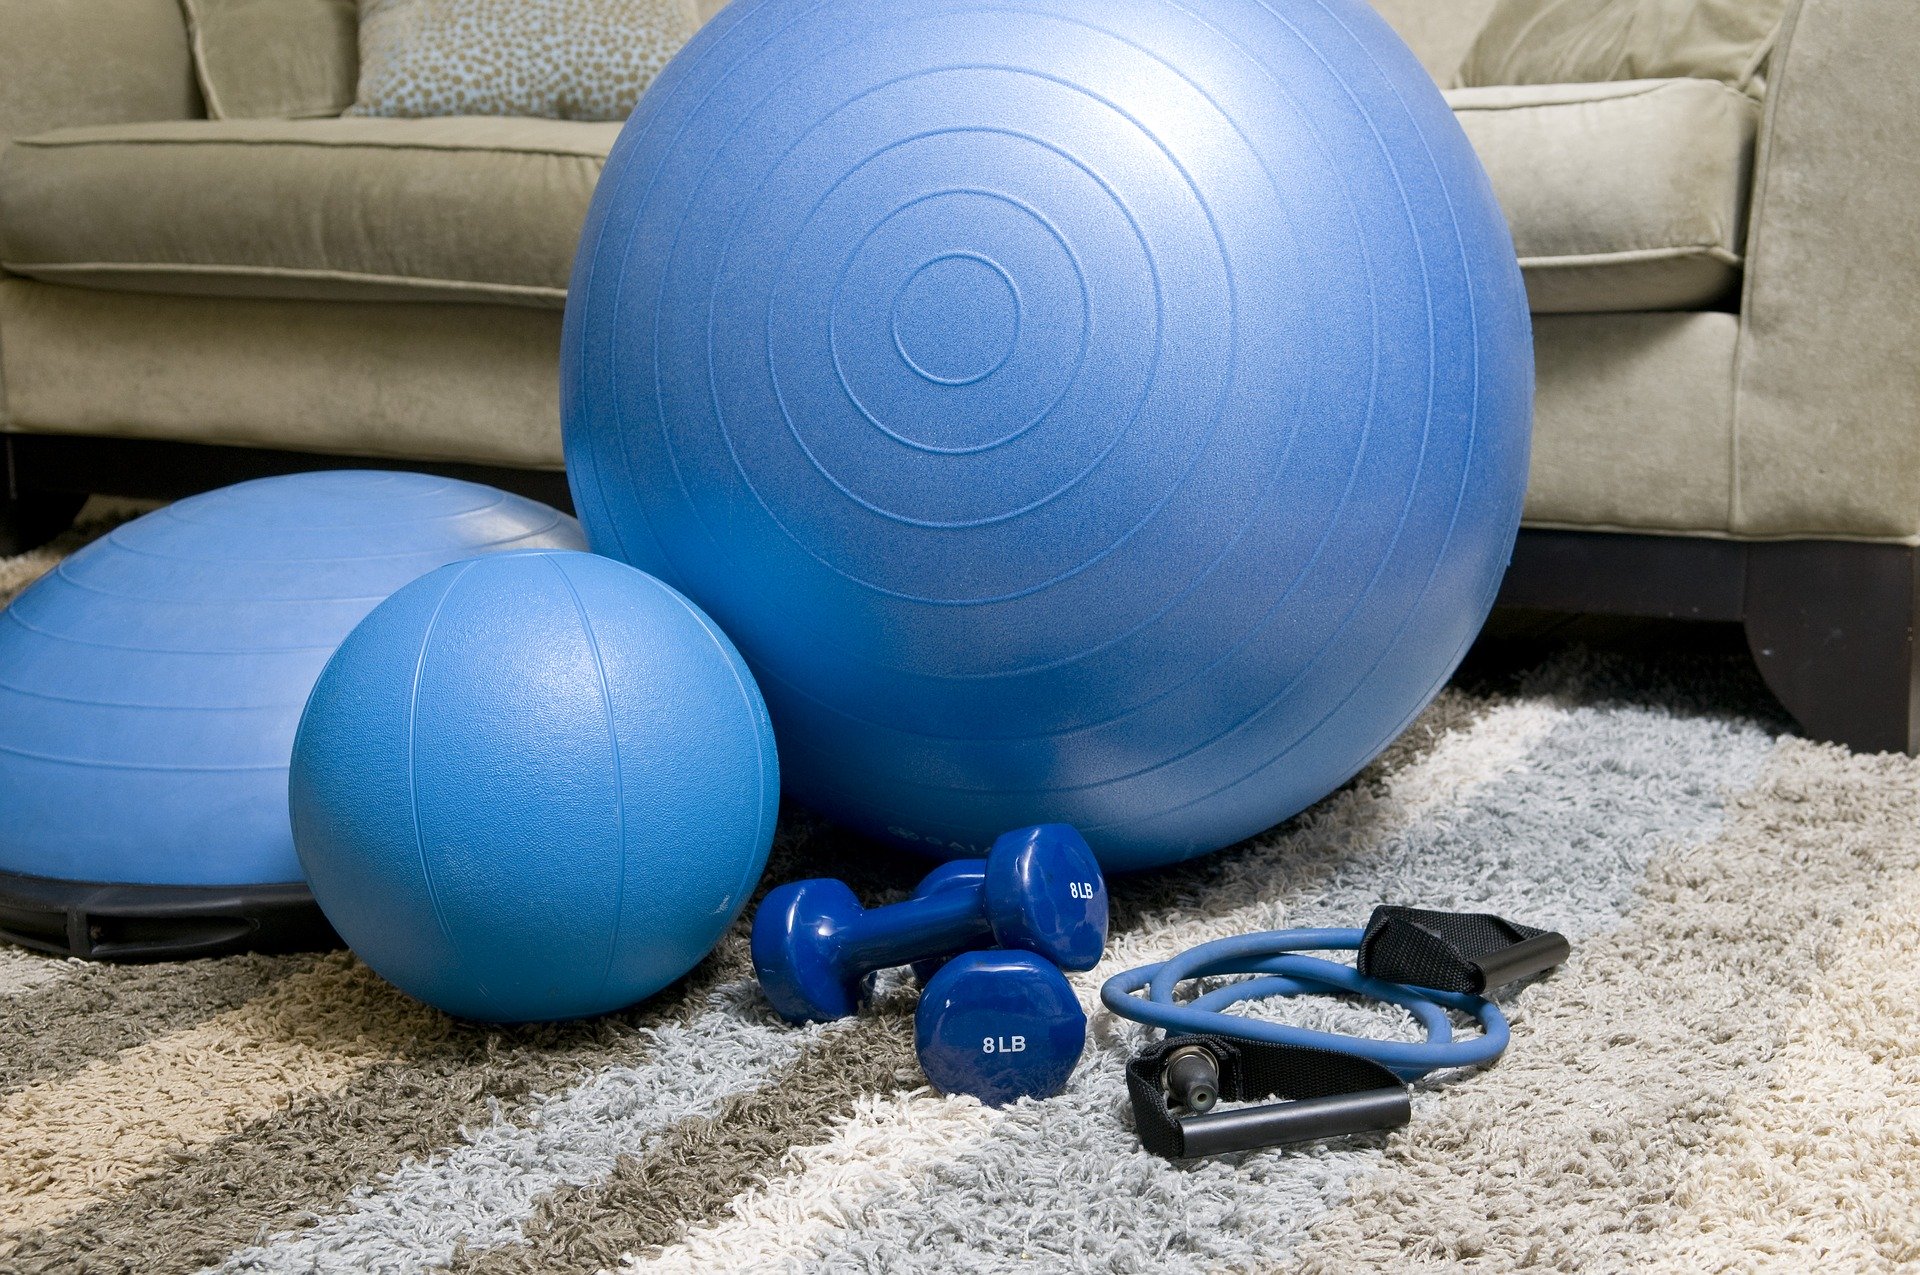 a blue exercise ball, dumbbells, and other equipment on the floor